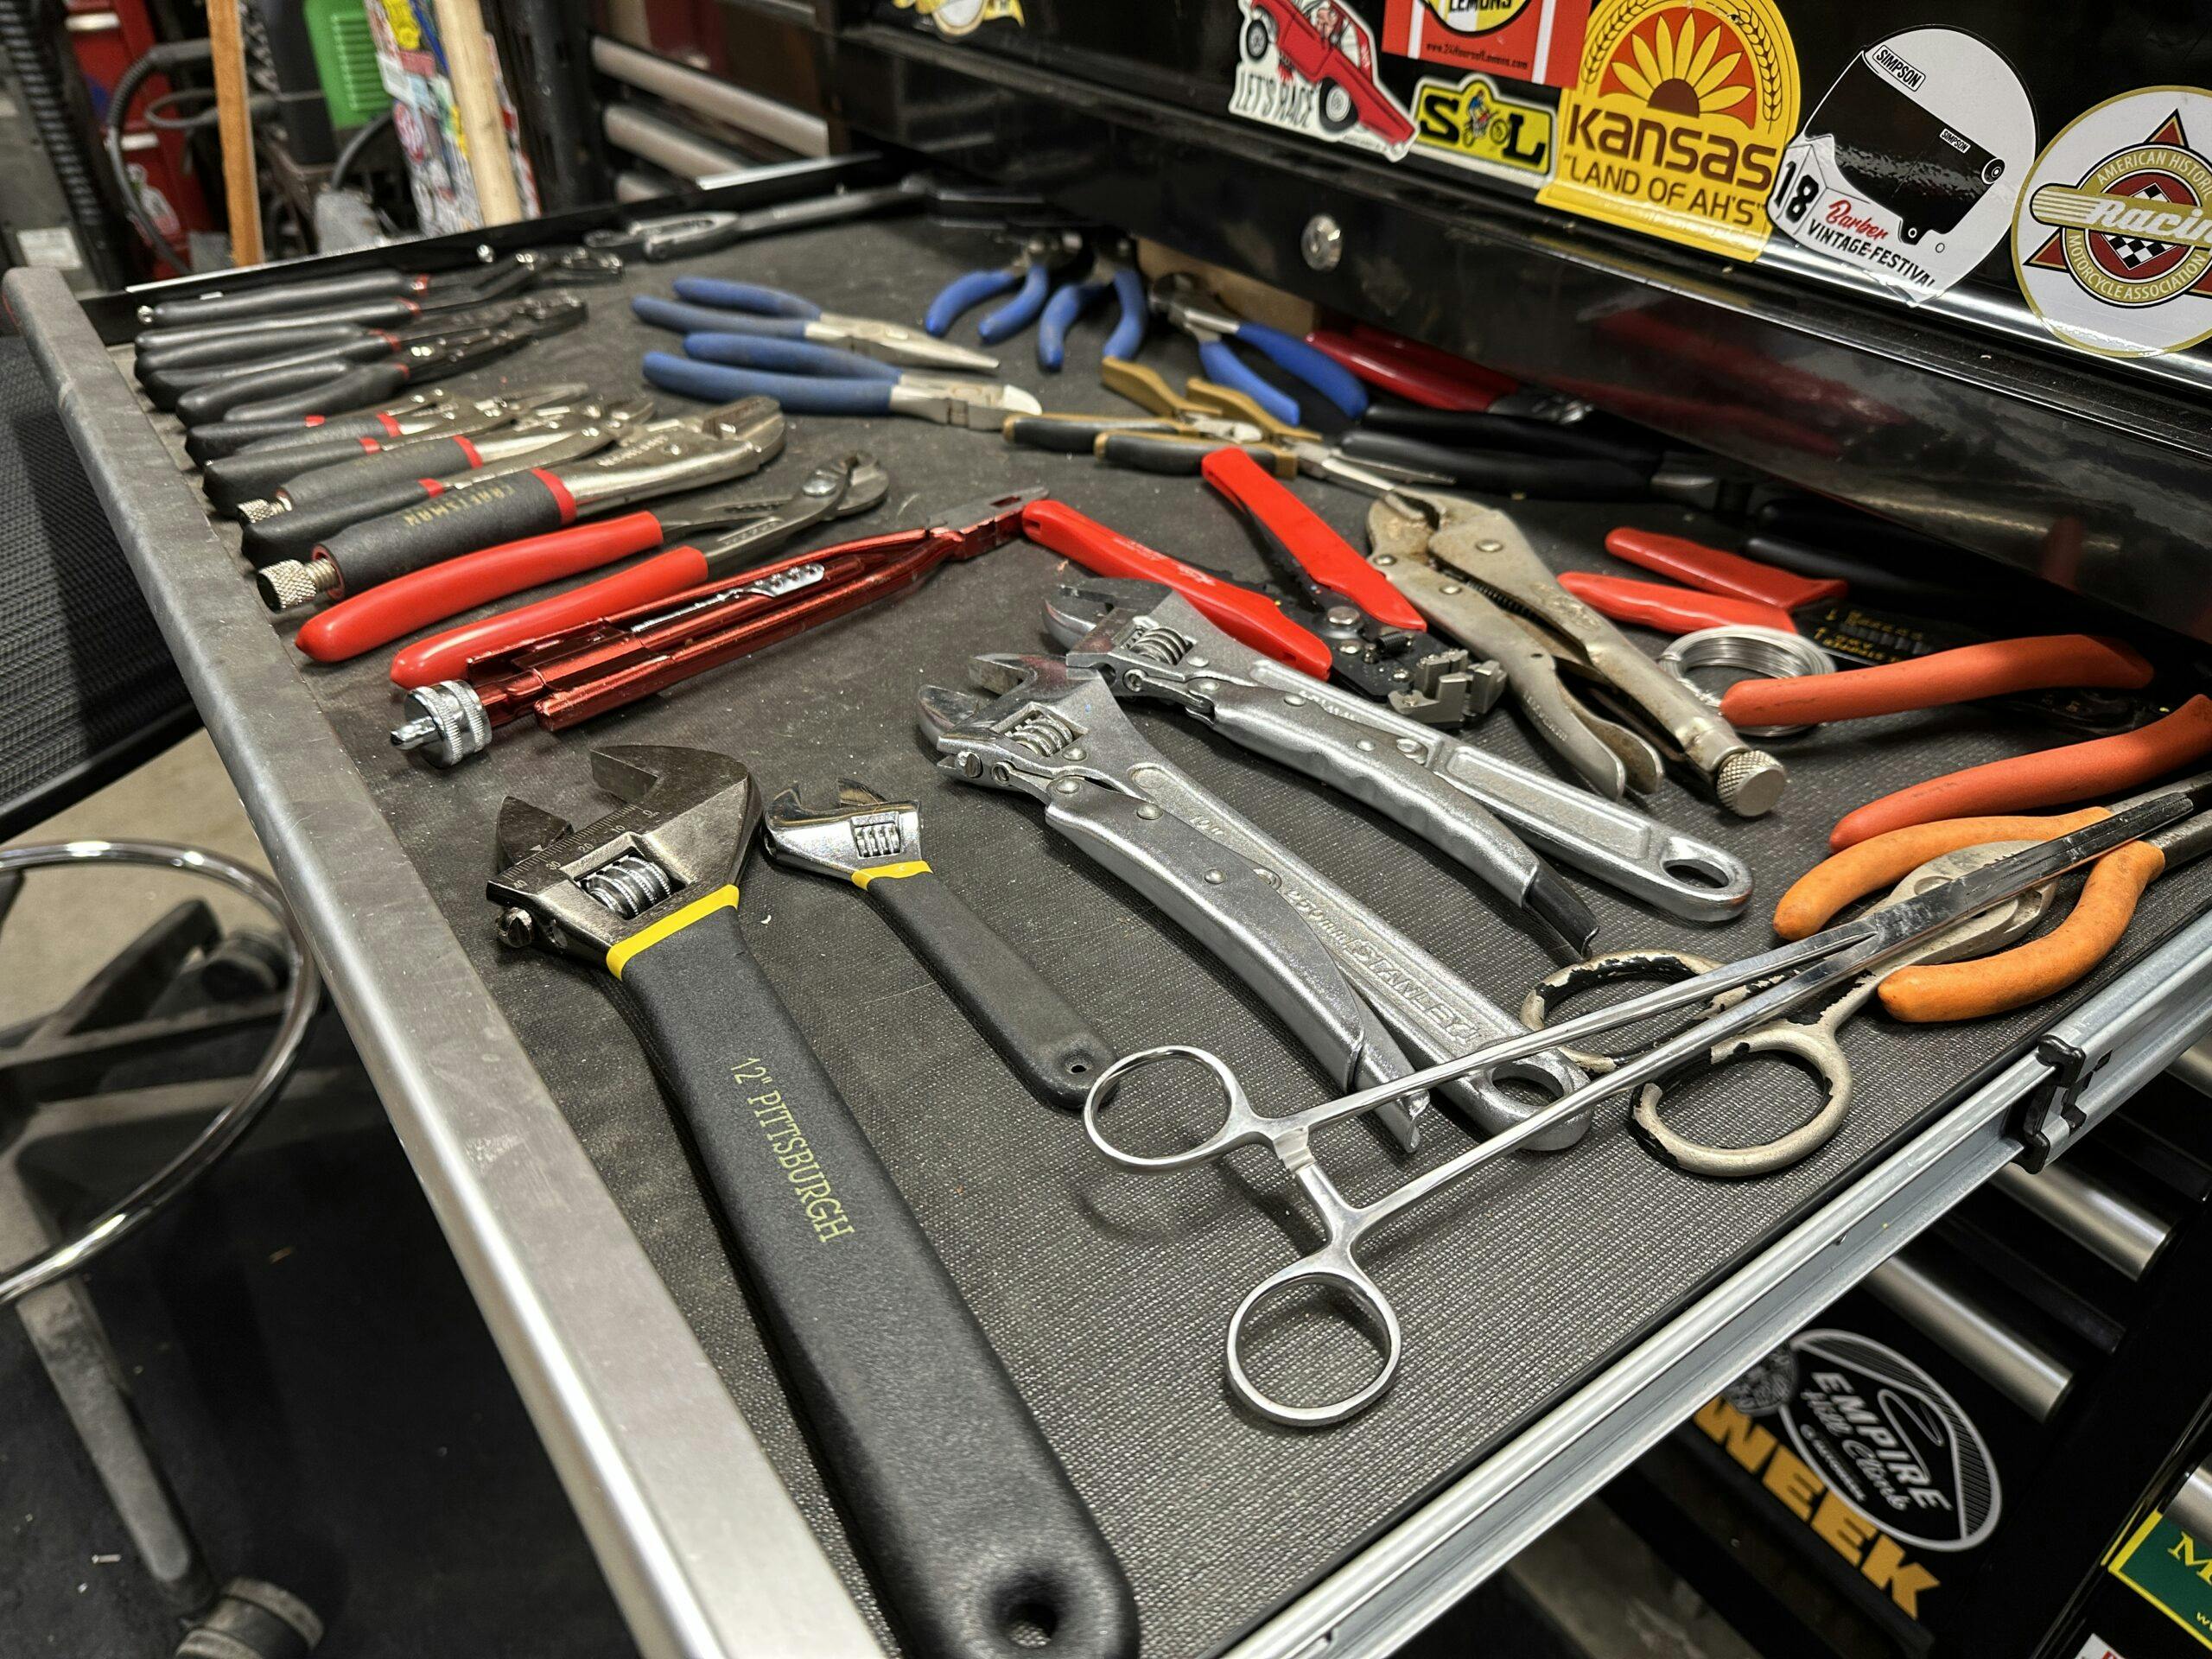 This pocket-friendly tool replaced a full set of open-end wrenches for me